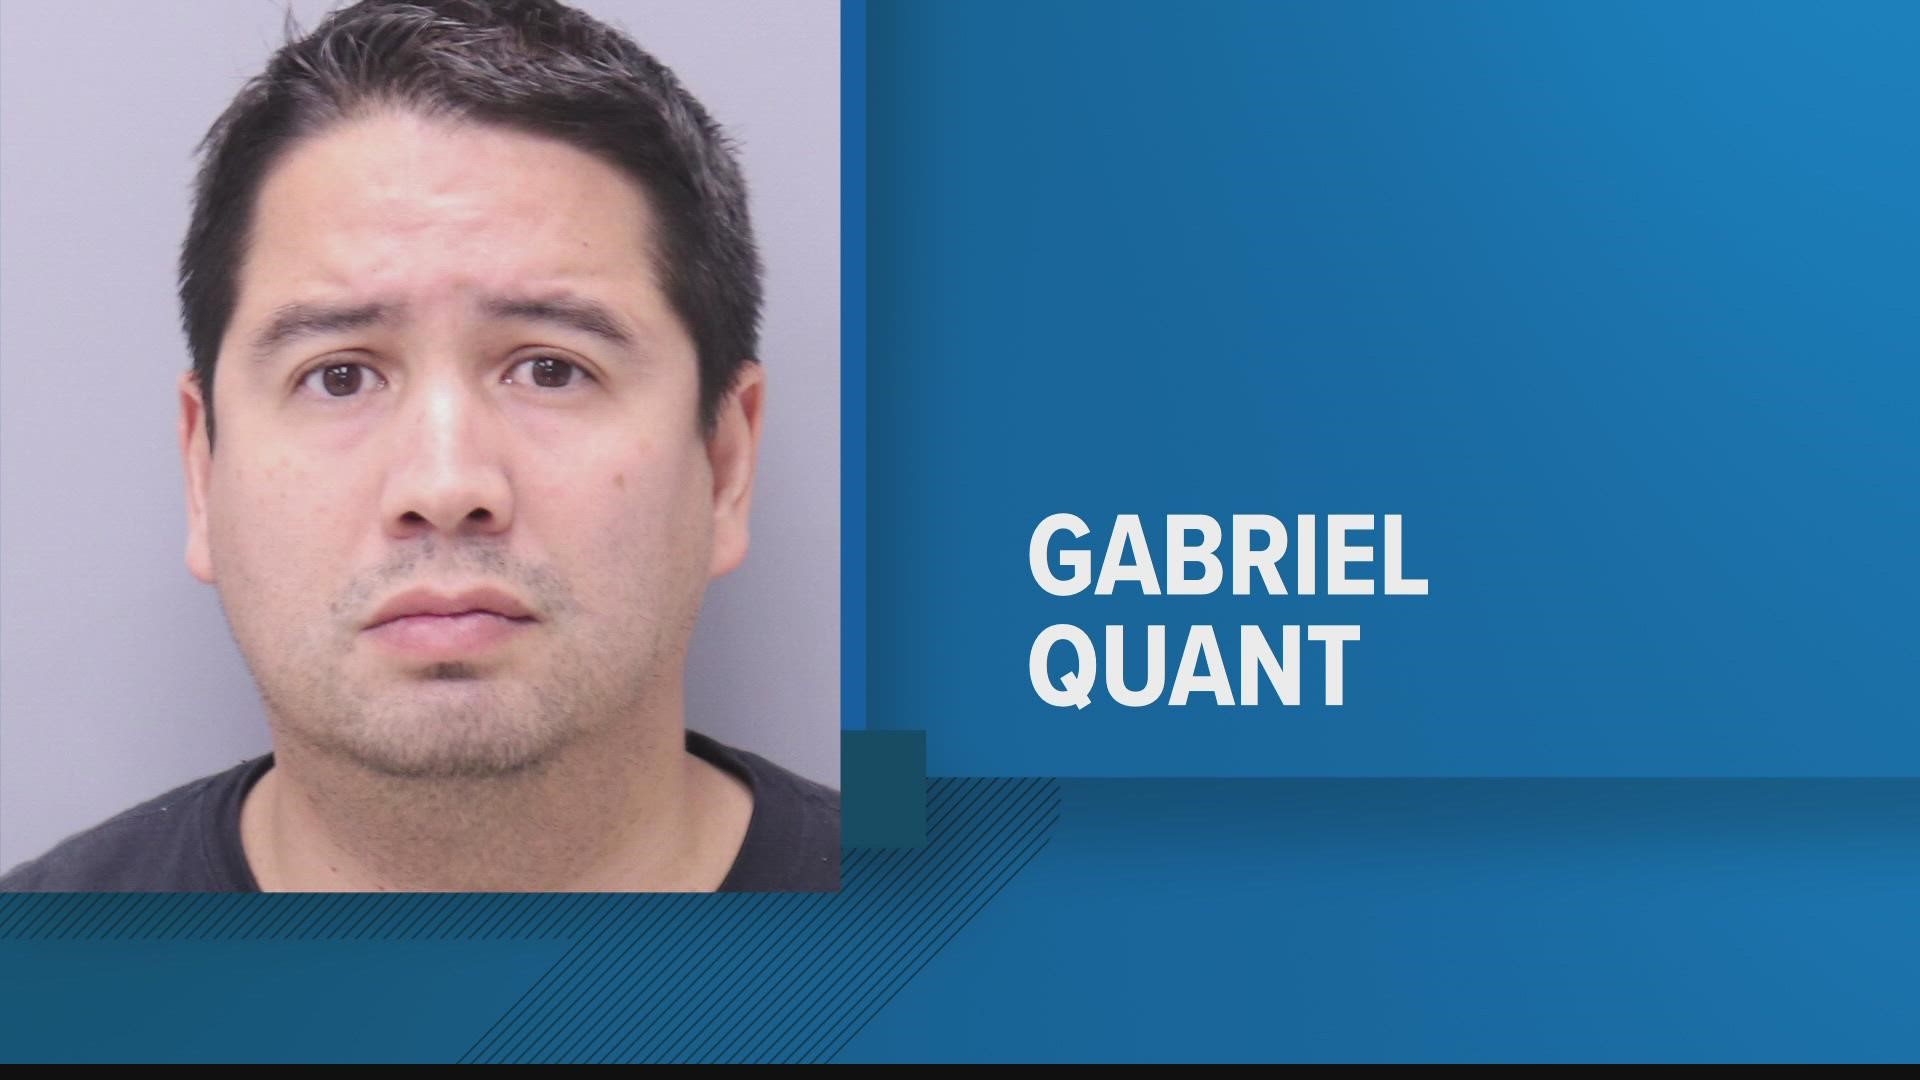 Gabriel Quant, 41, was arrested Wednesday for child abuse after allegedly breaking an infant's leg, telling deputies he "snapped" changing the child's diaper.